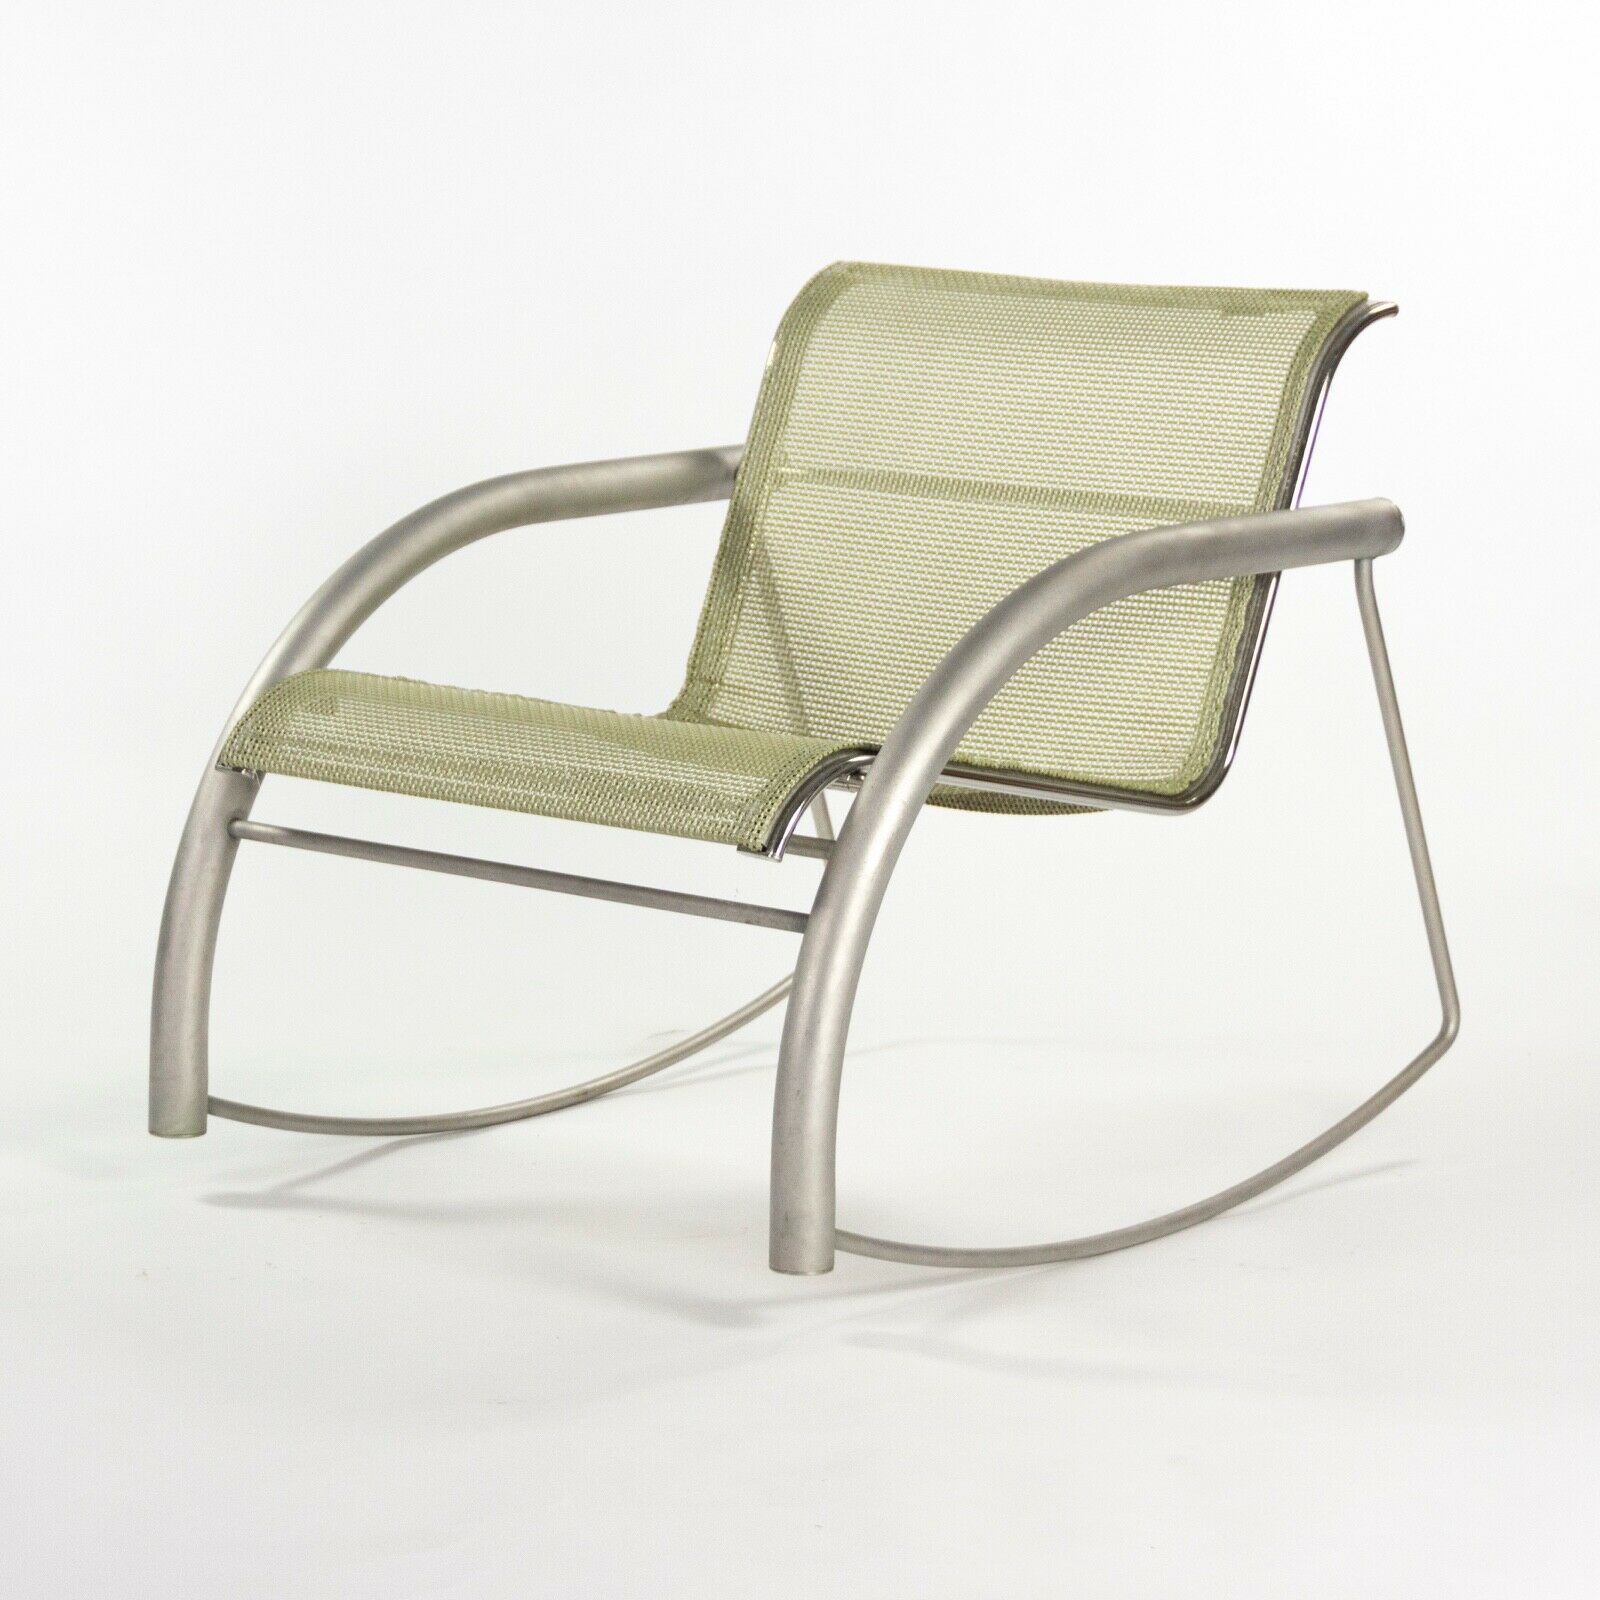 SOLD Prototype Richard Schultz 2002 Collection Stainless Steel & Mesh Rocking Chair